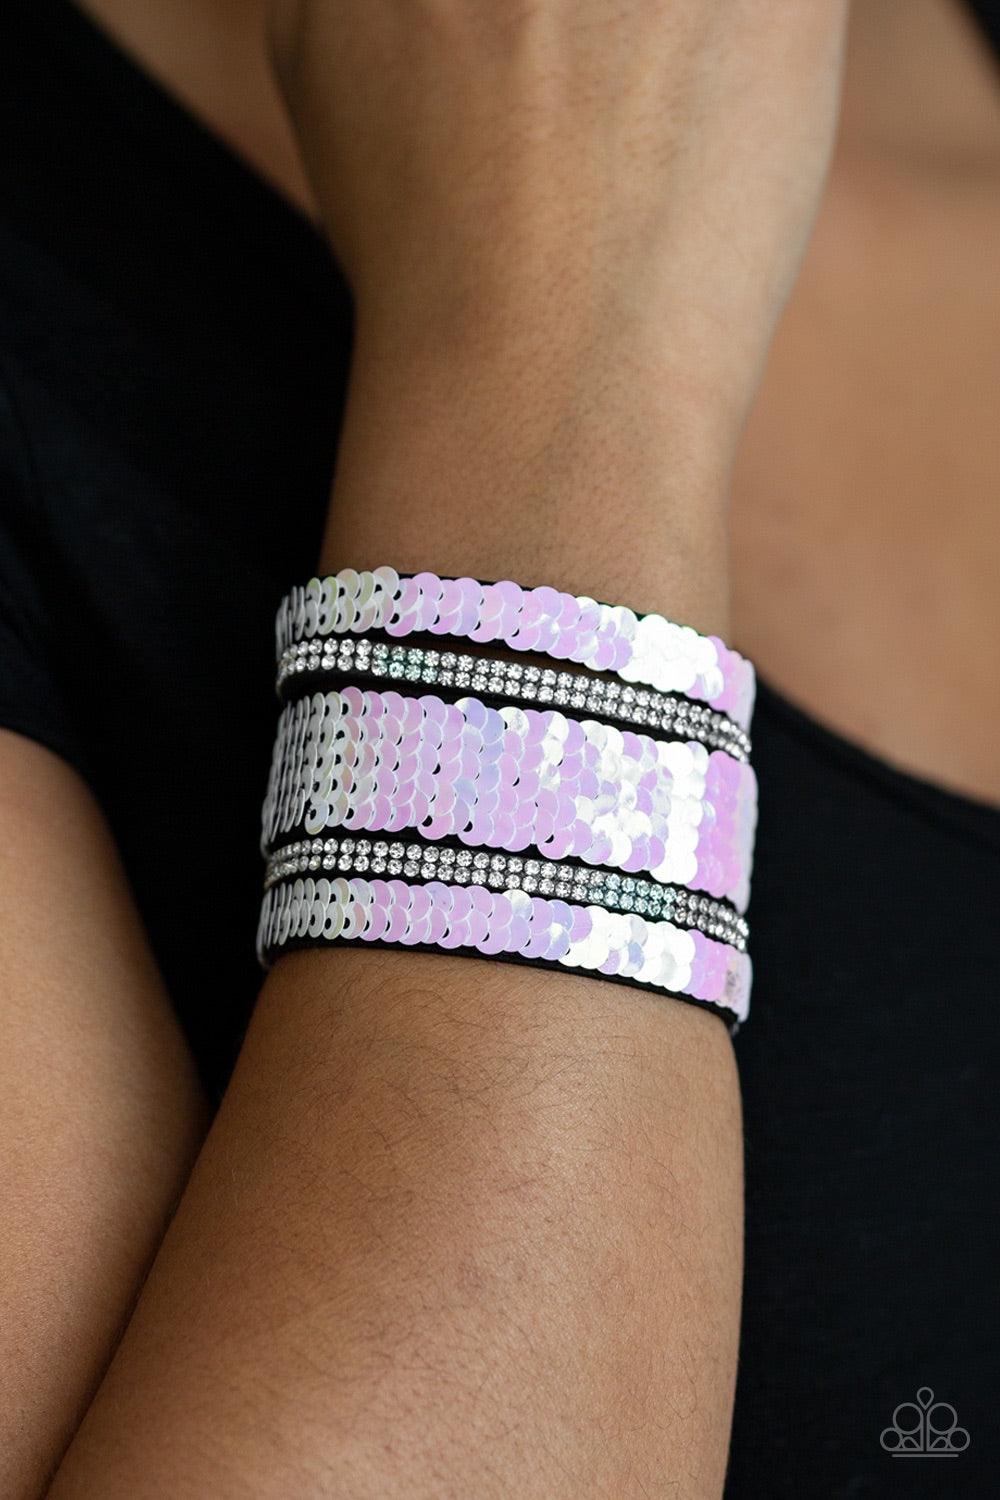 Paparazzi Accessories MERMAID Service - White Infused with strands of blinding white rhinestones, row after row of shimmery sequins are stitched across the front of a spliced black suede band. Bracelet features reversible sequins that change from white to